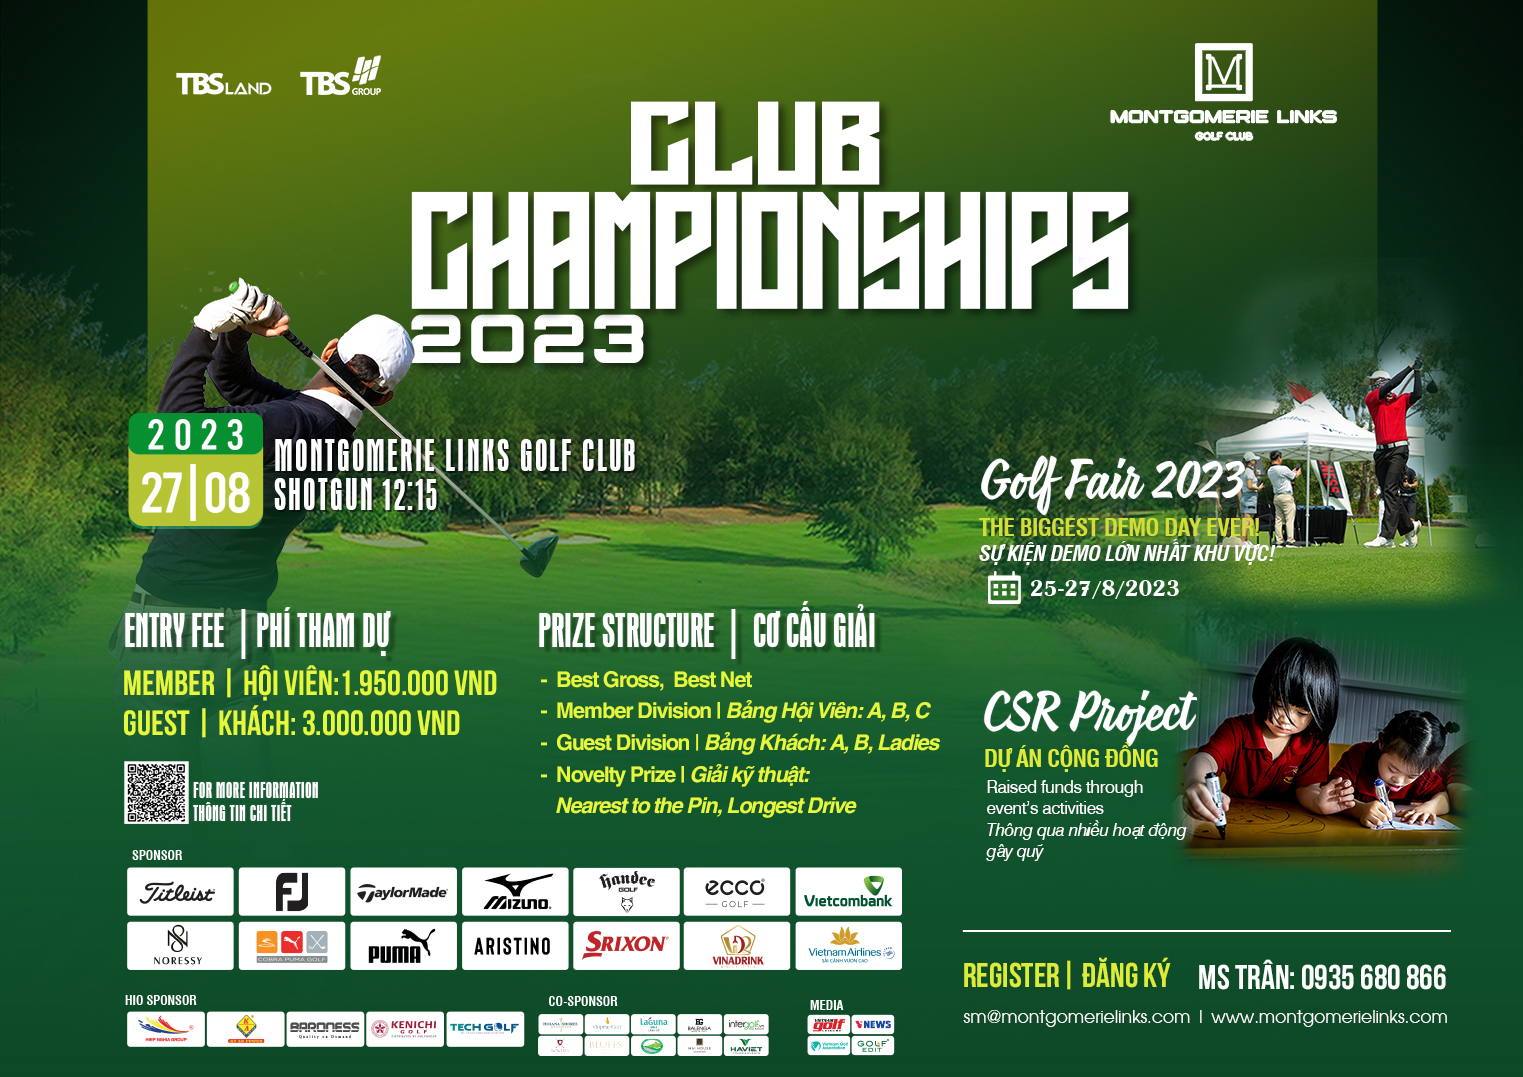 GOLF FAIR 2023 AT MONTGOMERIE LINKS GOLF CLUB - THE BIGGEST DEMO DAY EVER IN 3 DAYS!